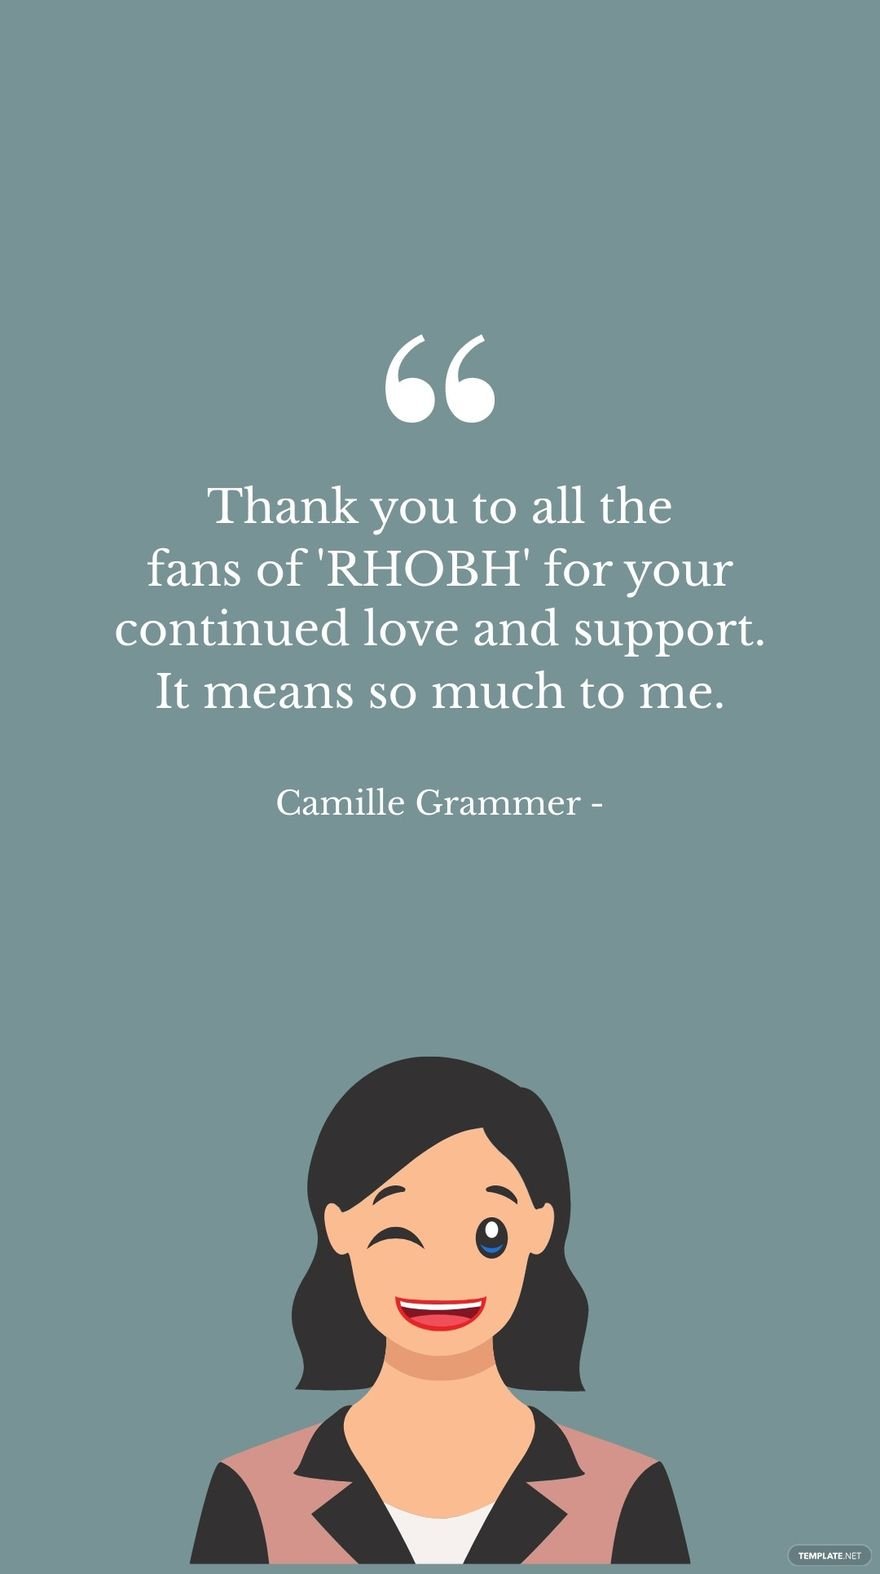 Free Camille Grammer - Thank you to all the fans of 'RHOBH' for your continued love and support. It means so much to me. in JPG